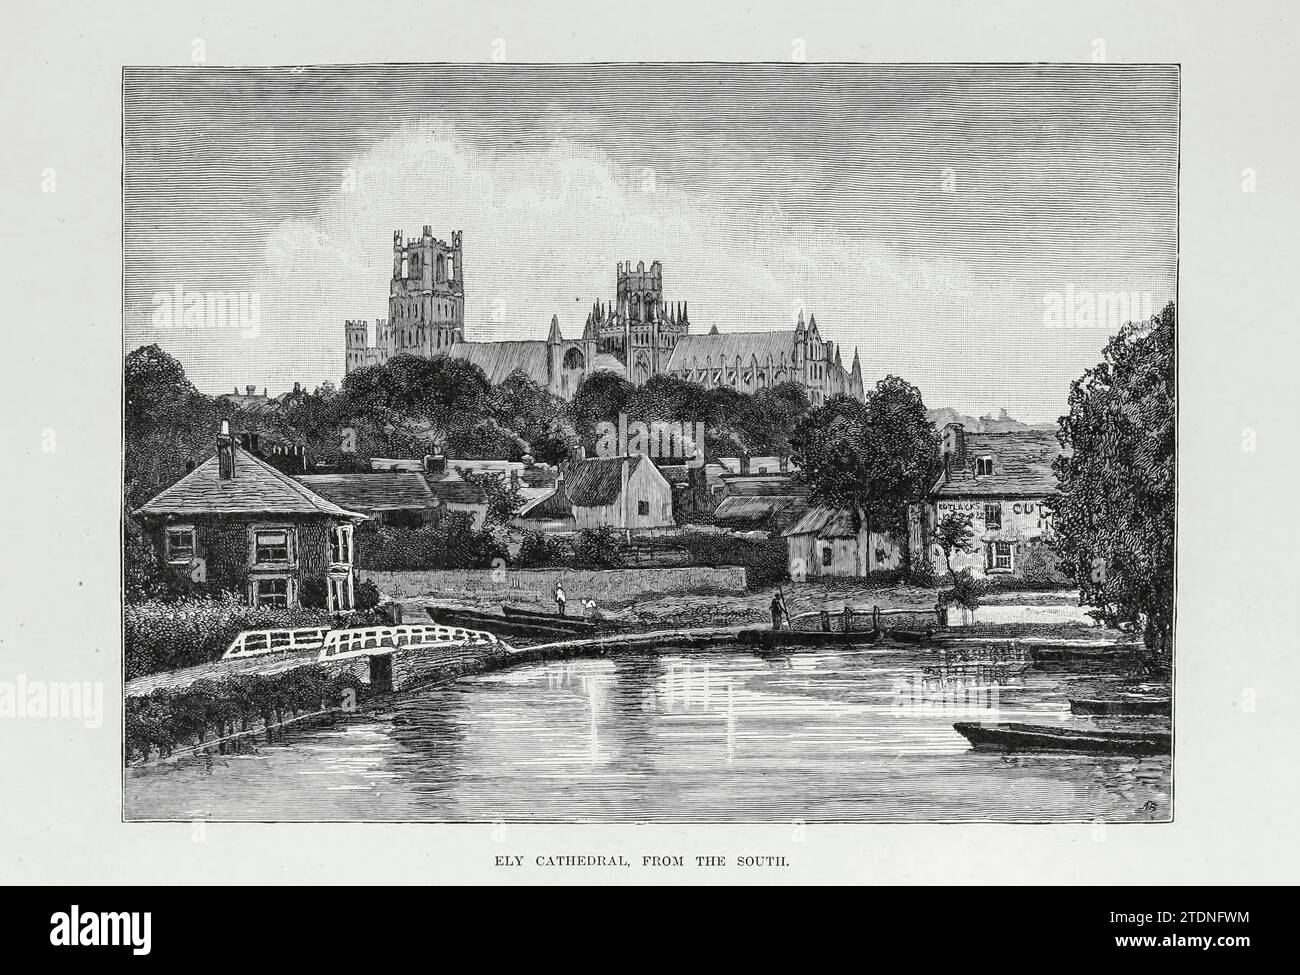 Ely Cathedral from the South aus dem Buch Cathedrals, Abbeys and Church of England and Wales: Deskriptive, Historical, Pictorial Band 1 von Bonney, T. G. (Thomas George), 1833–1923; Publisher London : Cassell 1890 Stockfoto